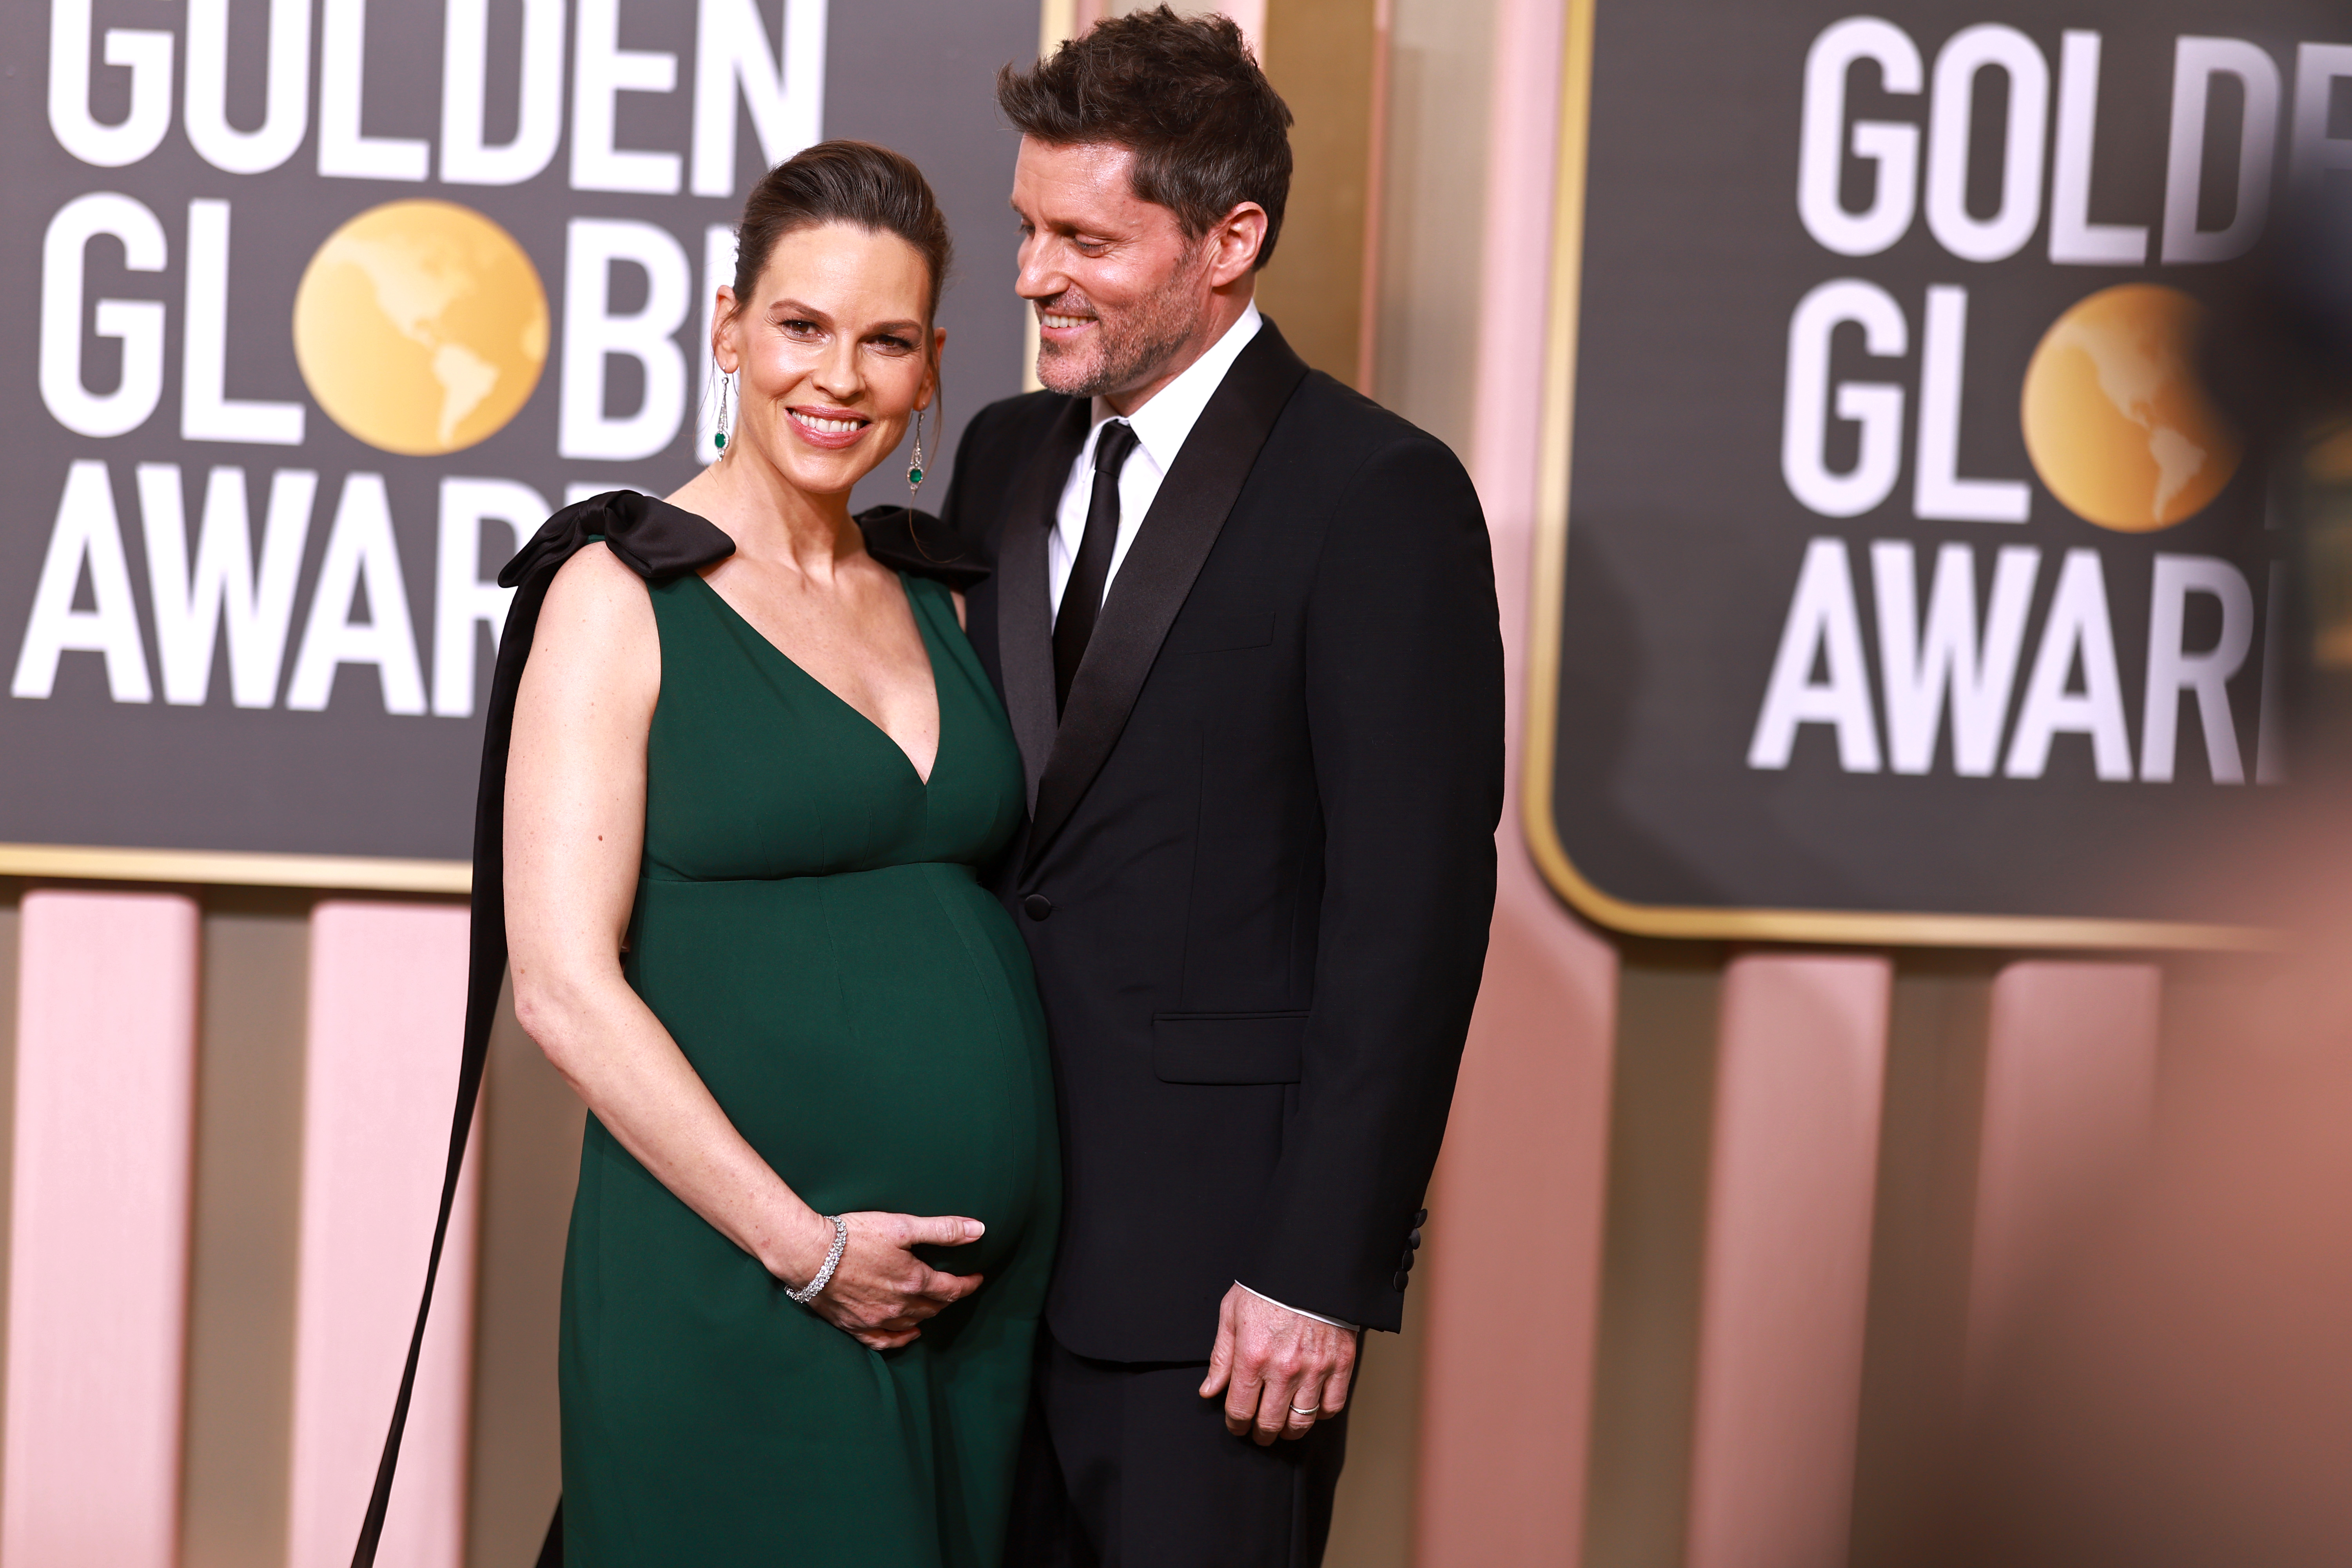 Hilary Swank and Philip Schneider attend the Golden Globe Awards at The Beverly Hilton on January 10, 2023. | Source: Getty Images